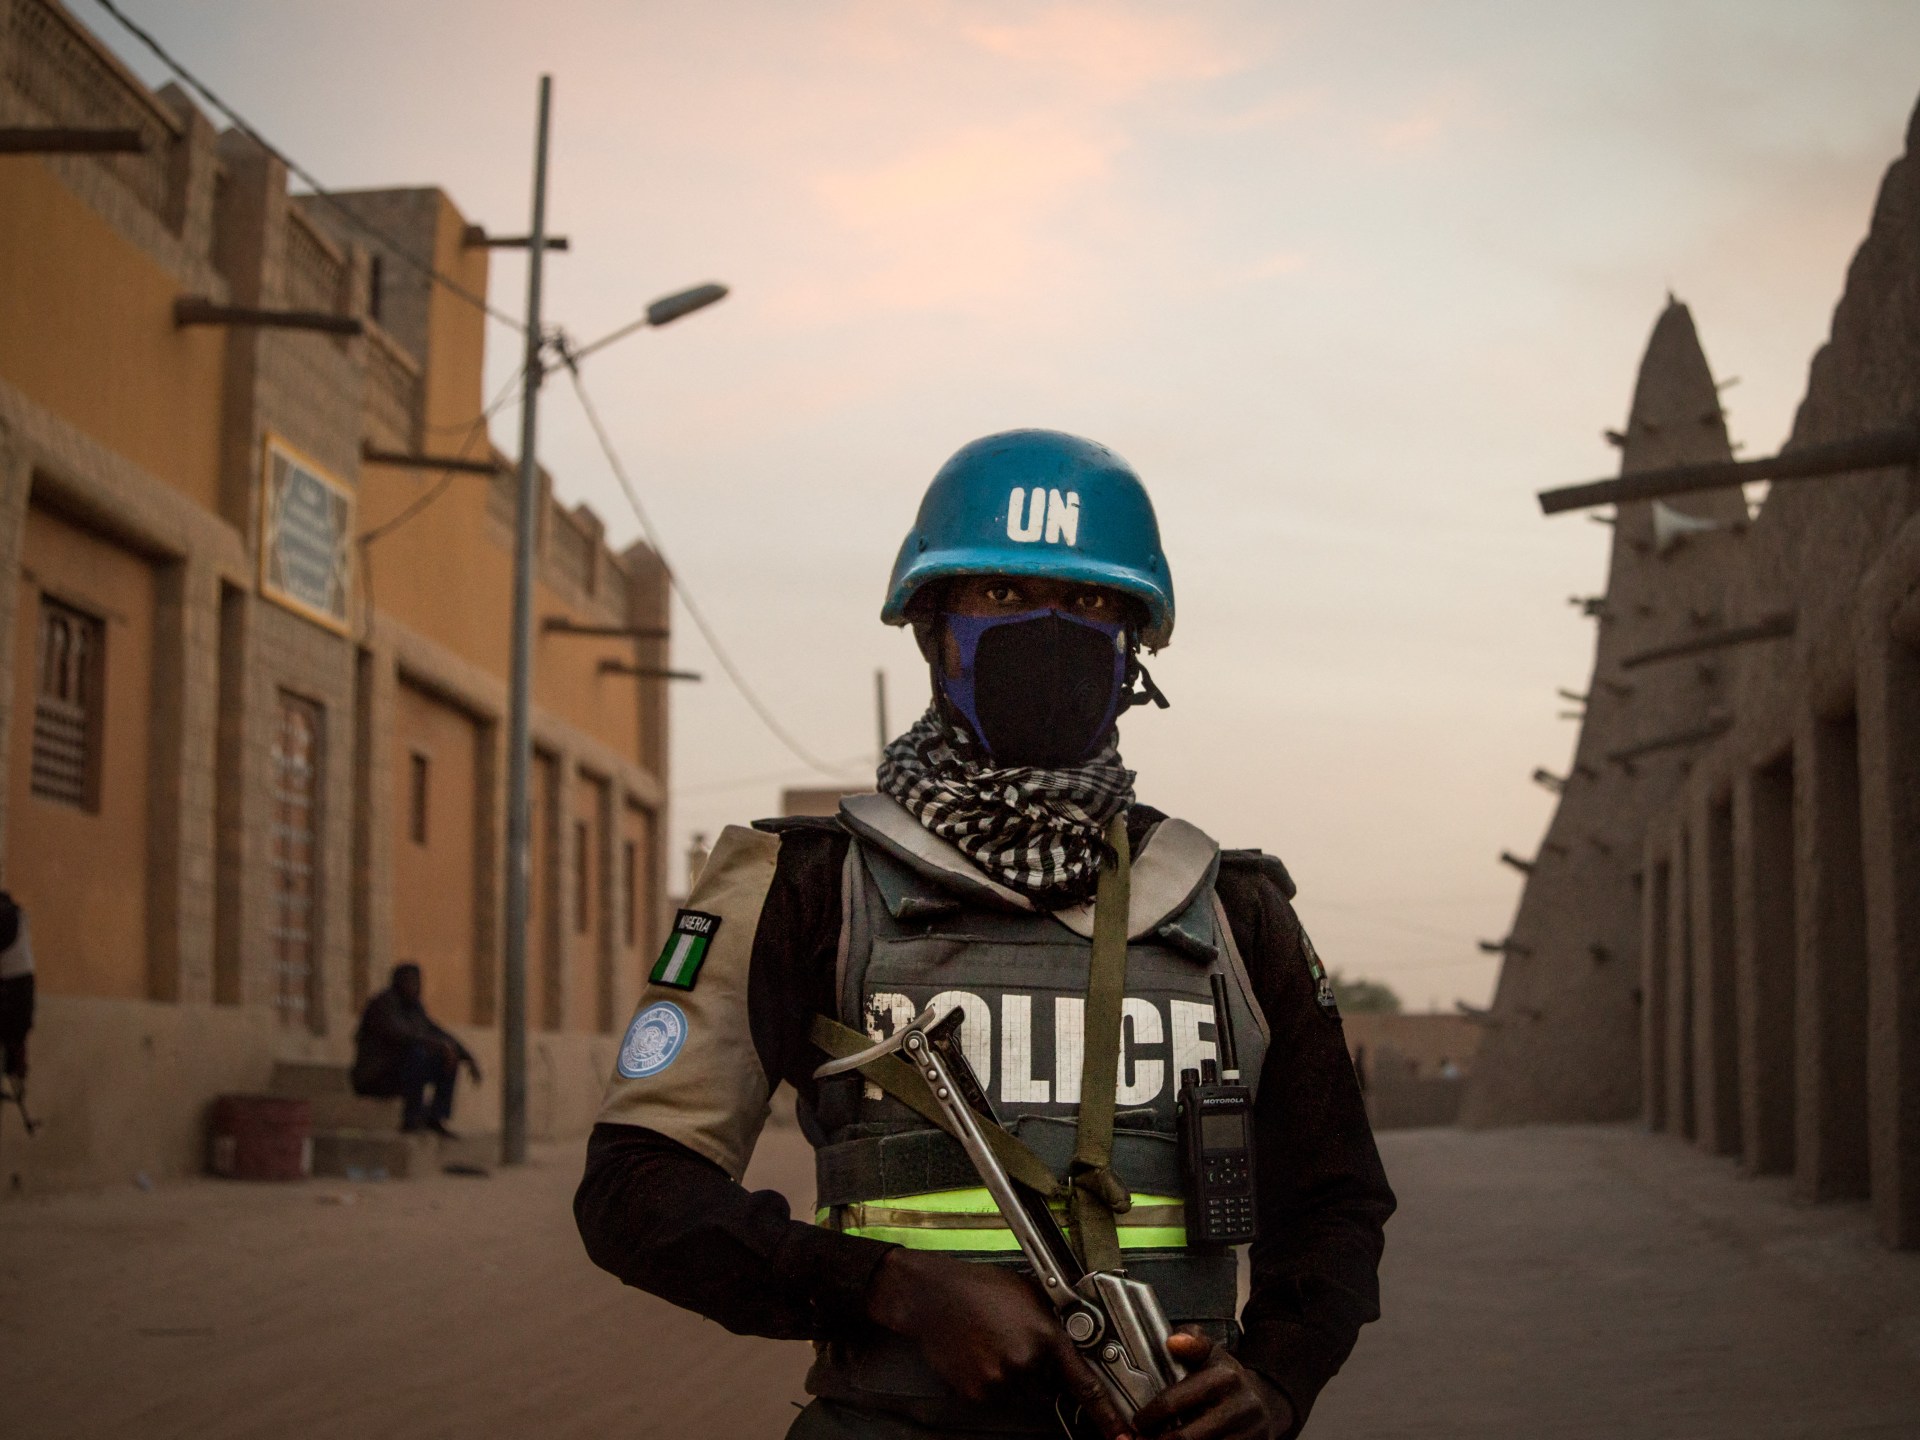 one-un-peacekeeper-dead-four-others-injured-in-north-mali-attack